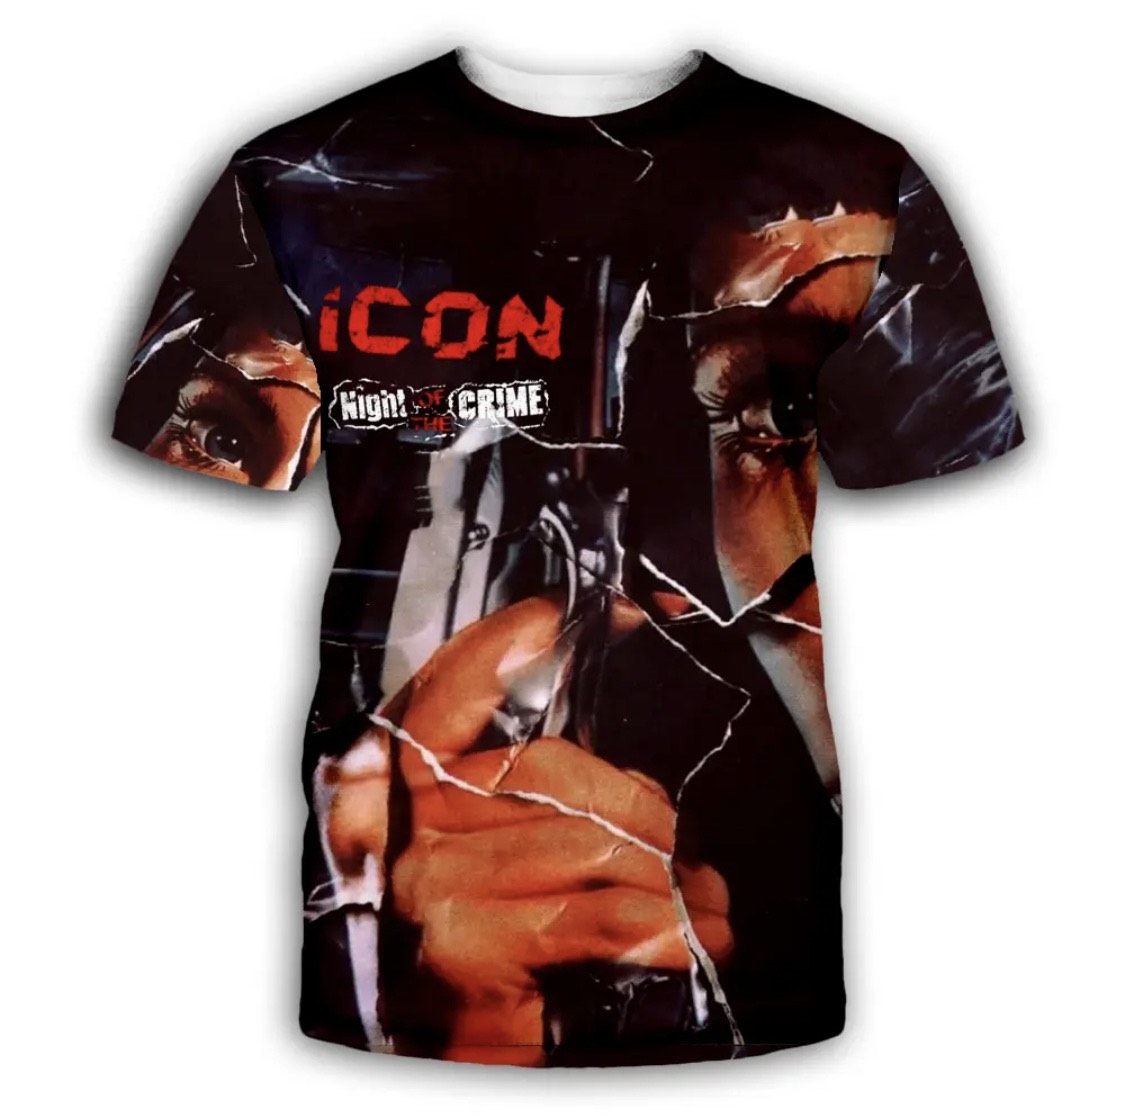 ICON night of the crime t-shirt